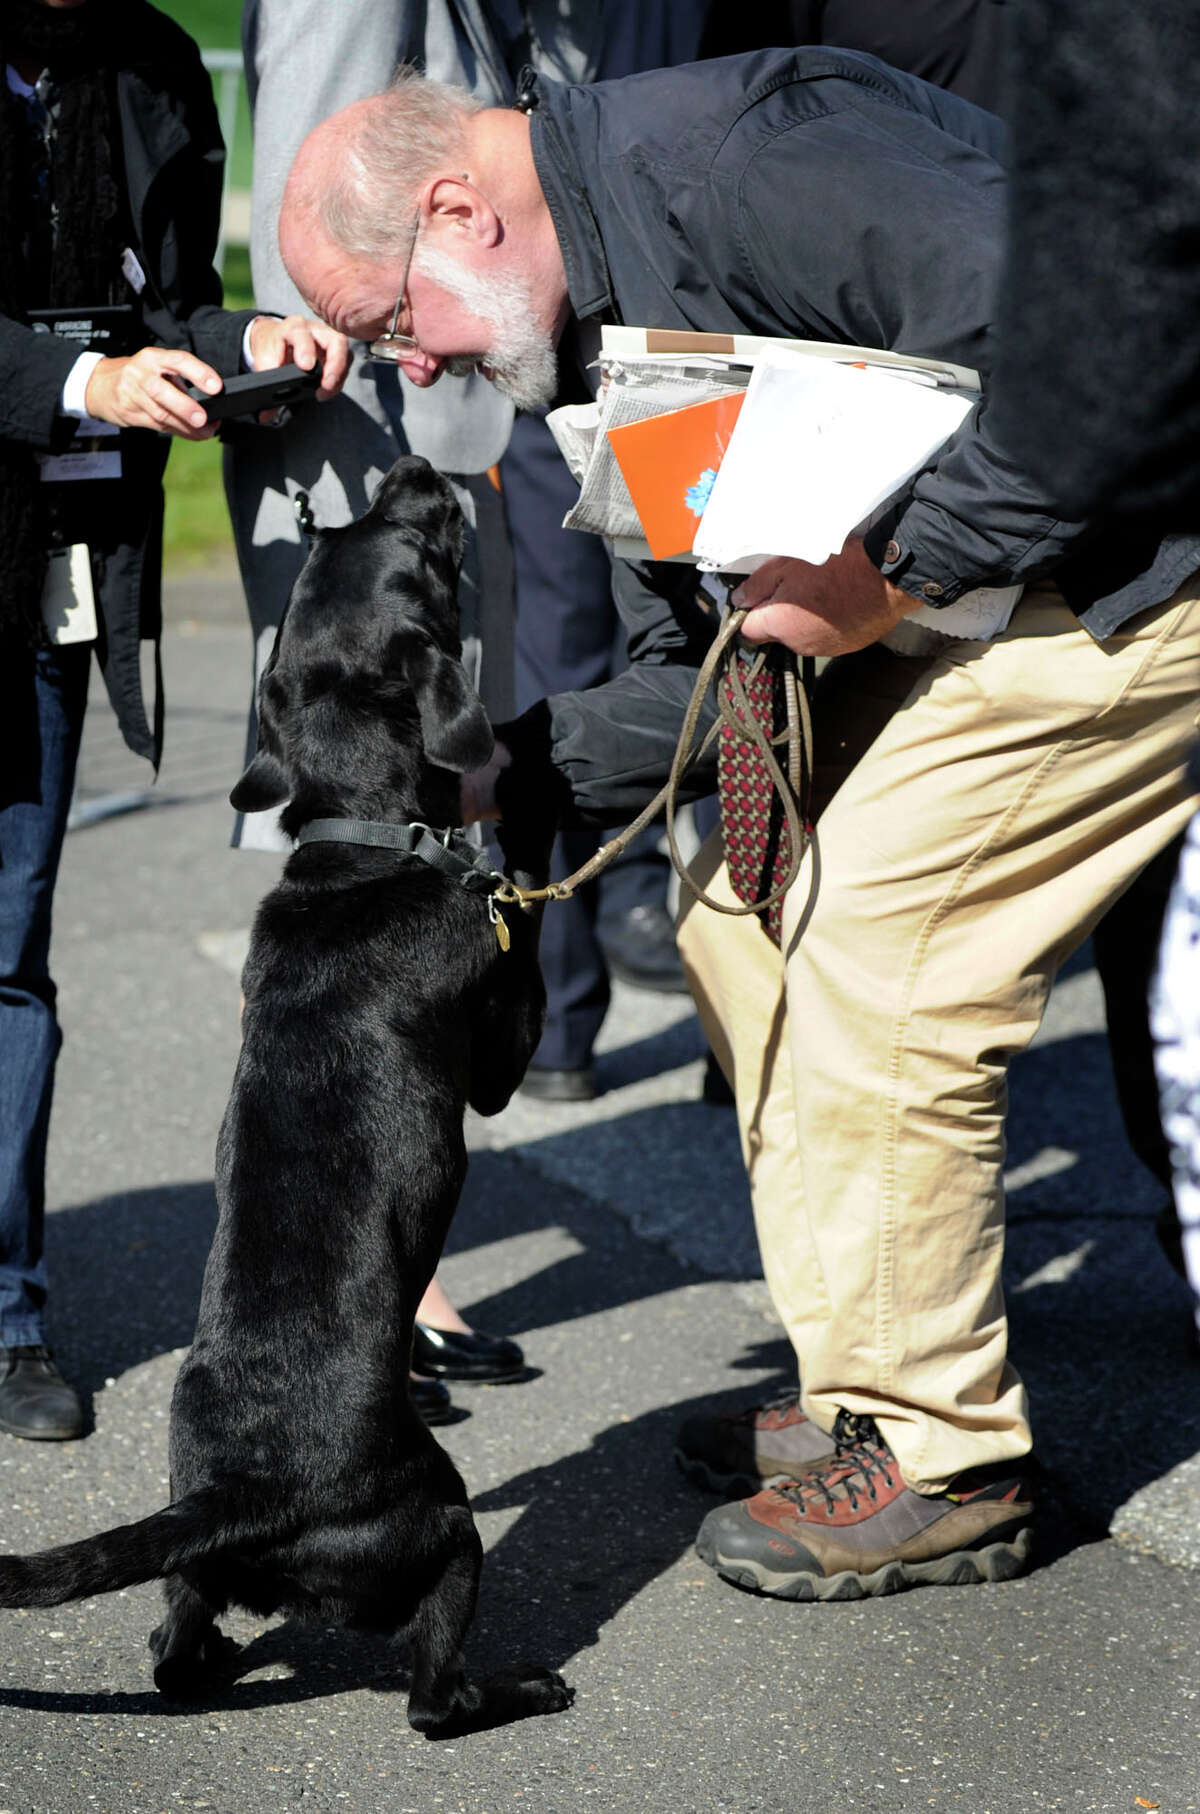 News-Times reporter Bob Miller, makes friends with a contraband-sniffing dog before a sweep of media and their equipment. A large turn out of media turned up at Western Connecticut State University to cover a visit by the Dalai Lama Thursday, Oct. 18, 2012.